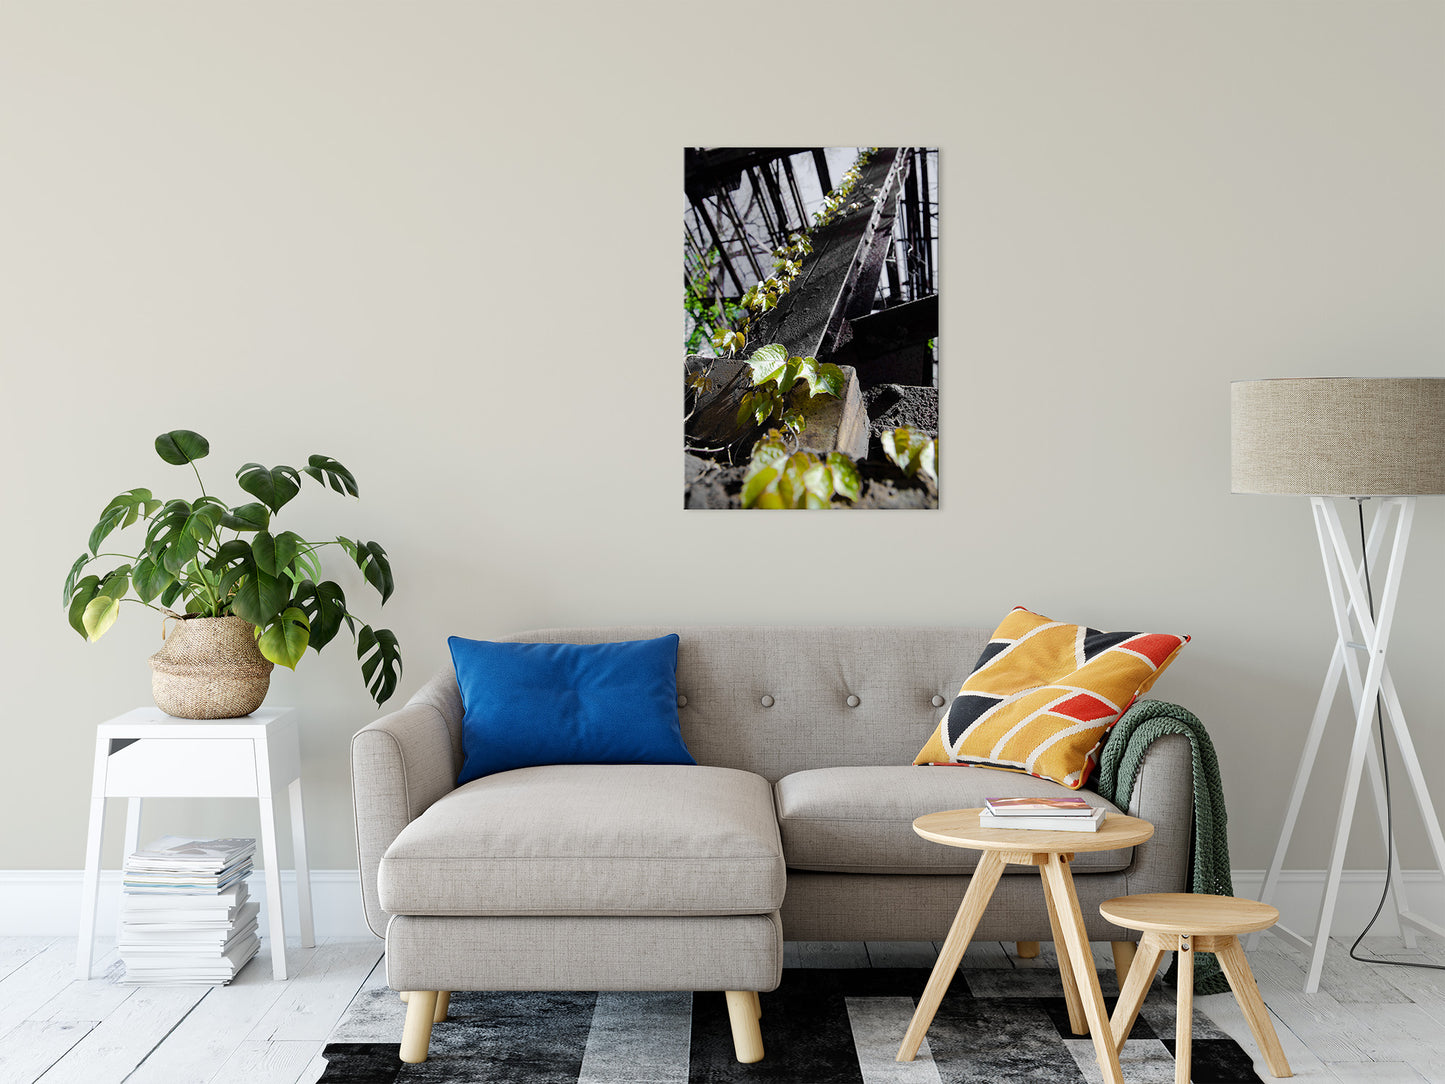 Nature Taking Over Botanical / Nature Photo Fine Art Canvas Wall Art Prints 24" x 36" - PIPAFINEART